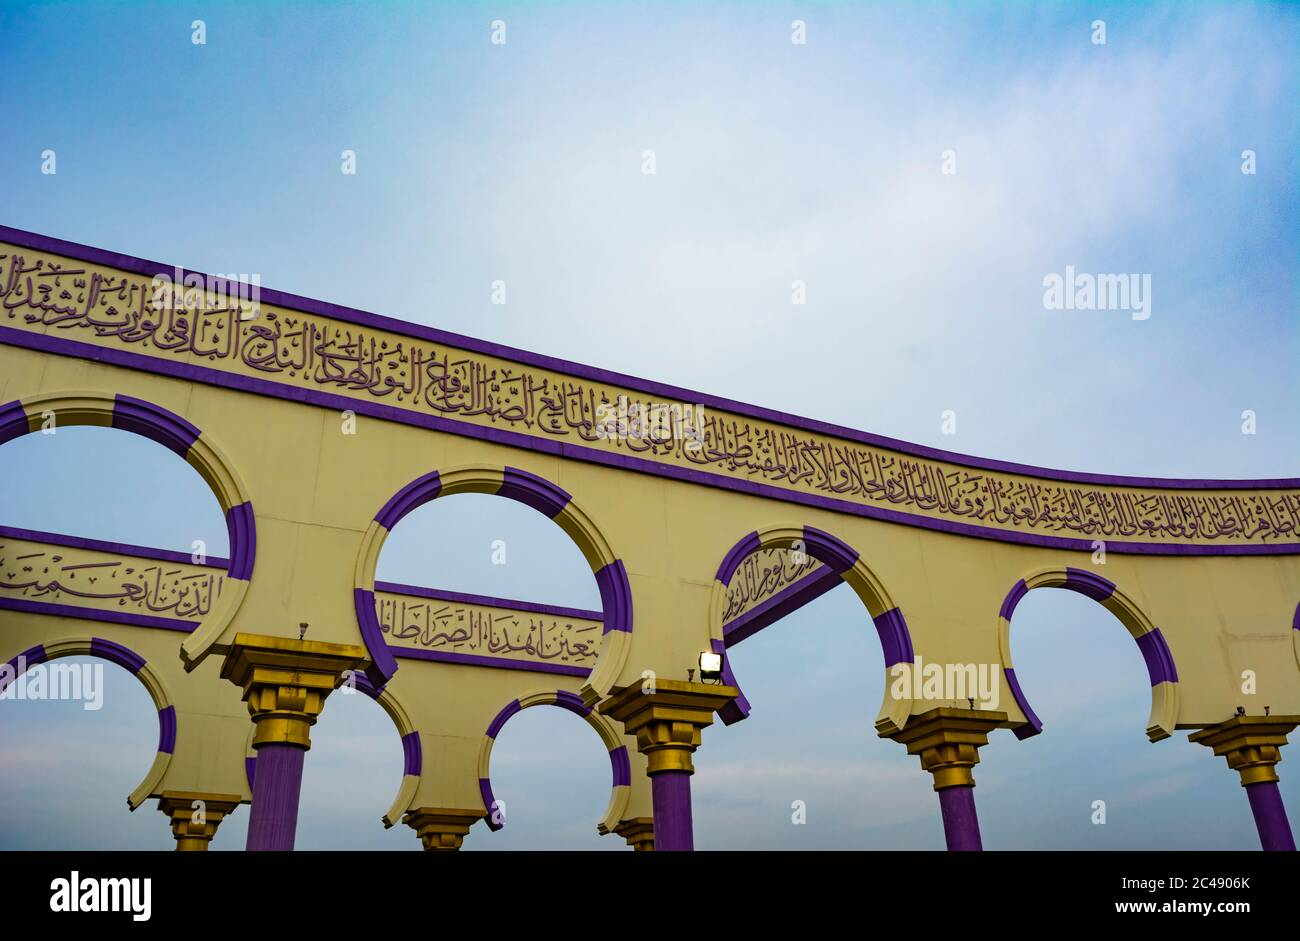 Semarang, Indonesia - CIRCA Nov 2019: The wall with arabic calligraphy and arch decoration in Masjid Agung Jawa Tengah (Great Mosque of Central Java) Stock Photo